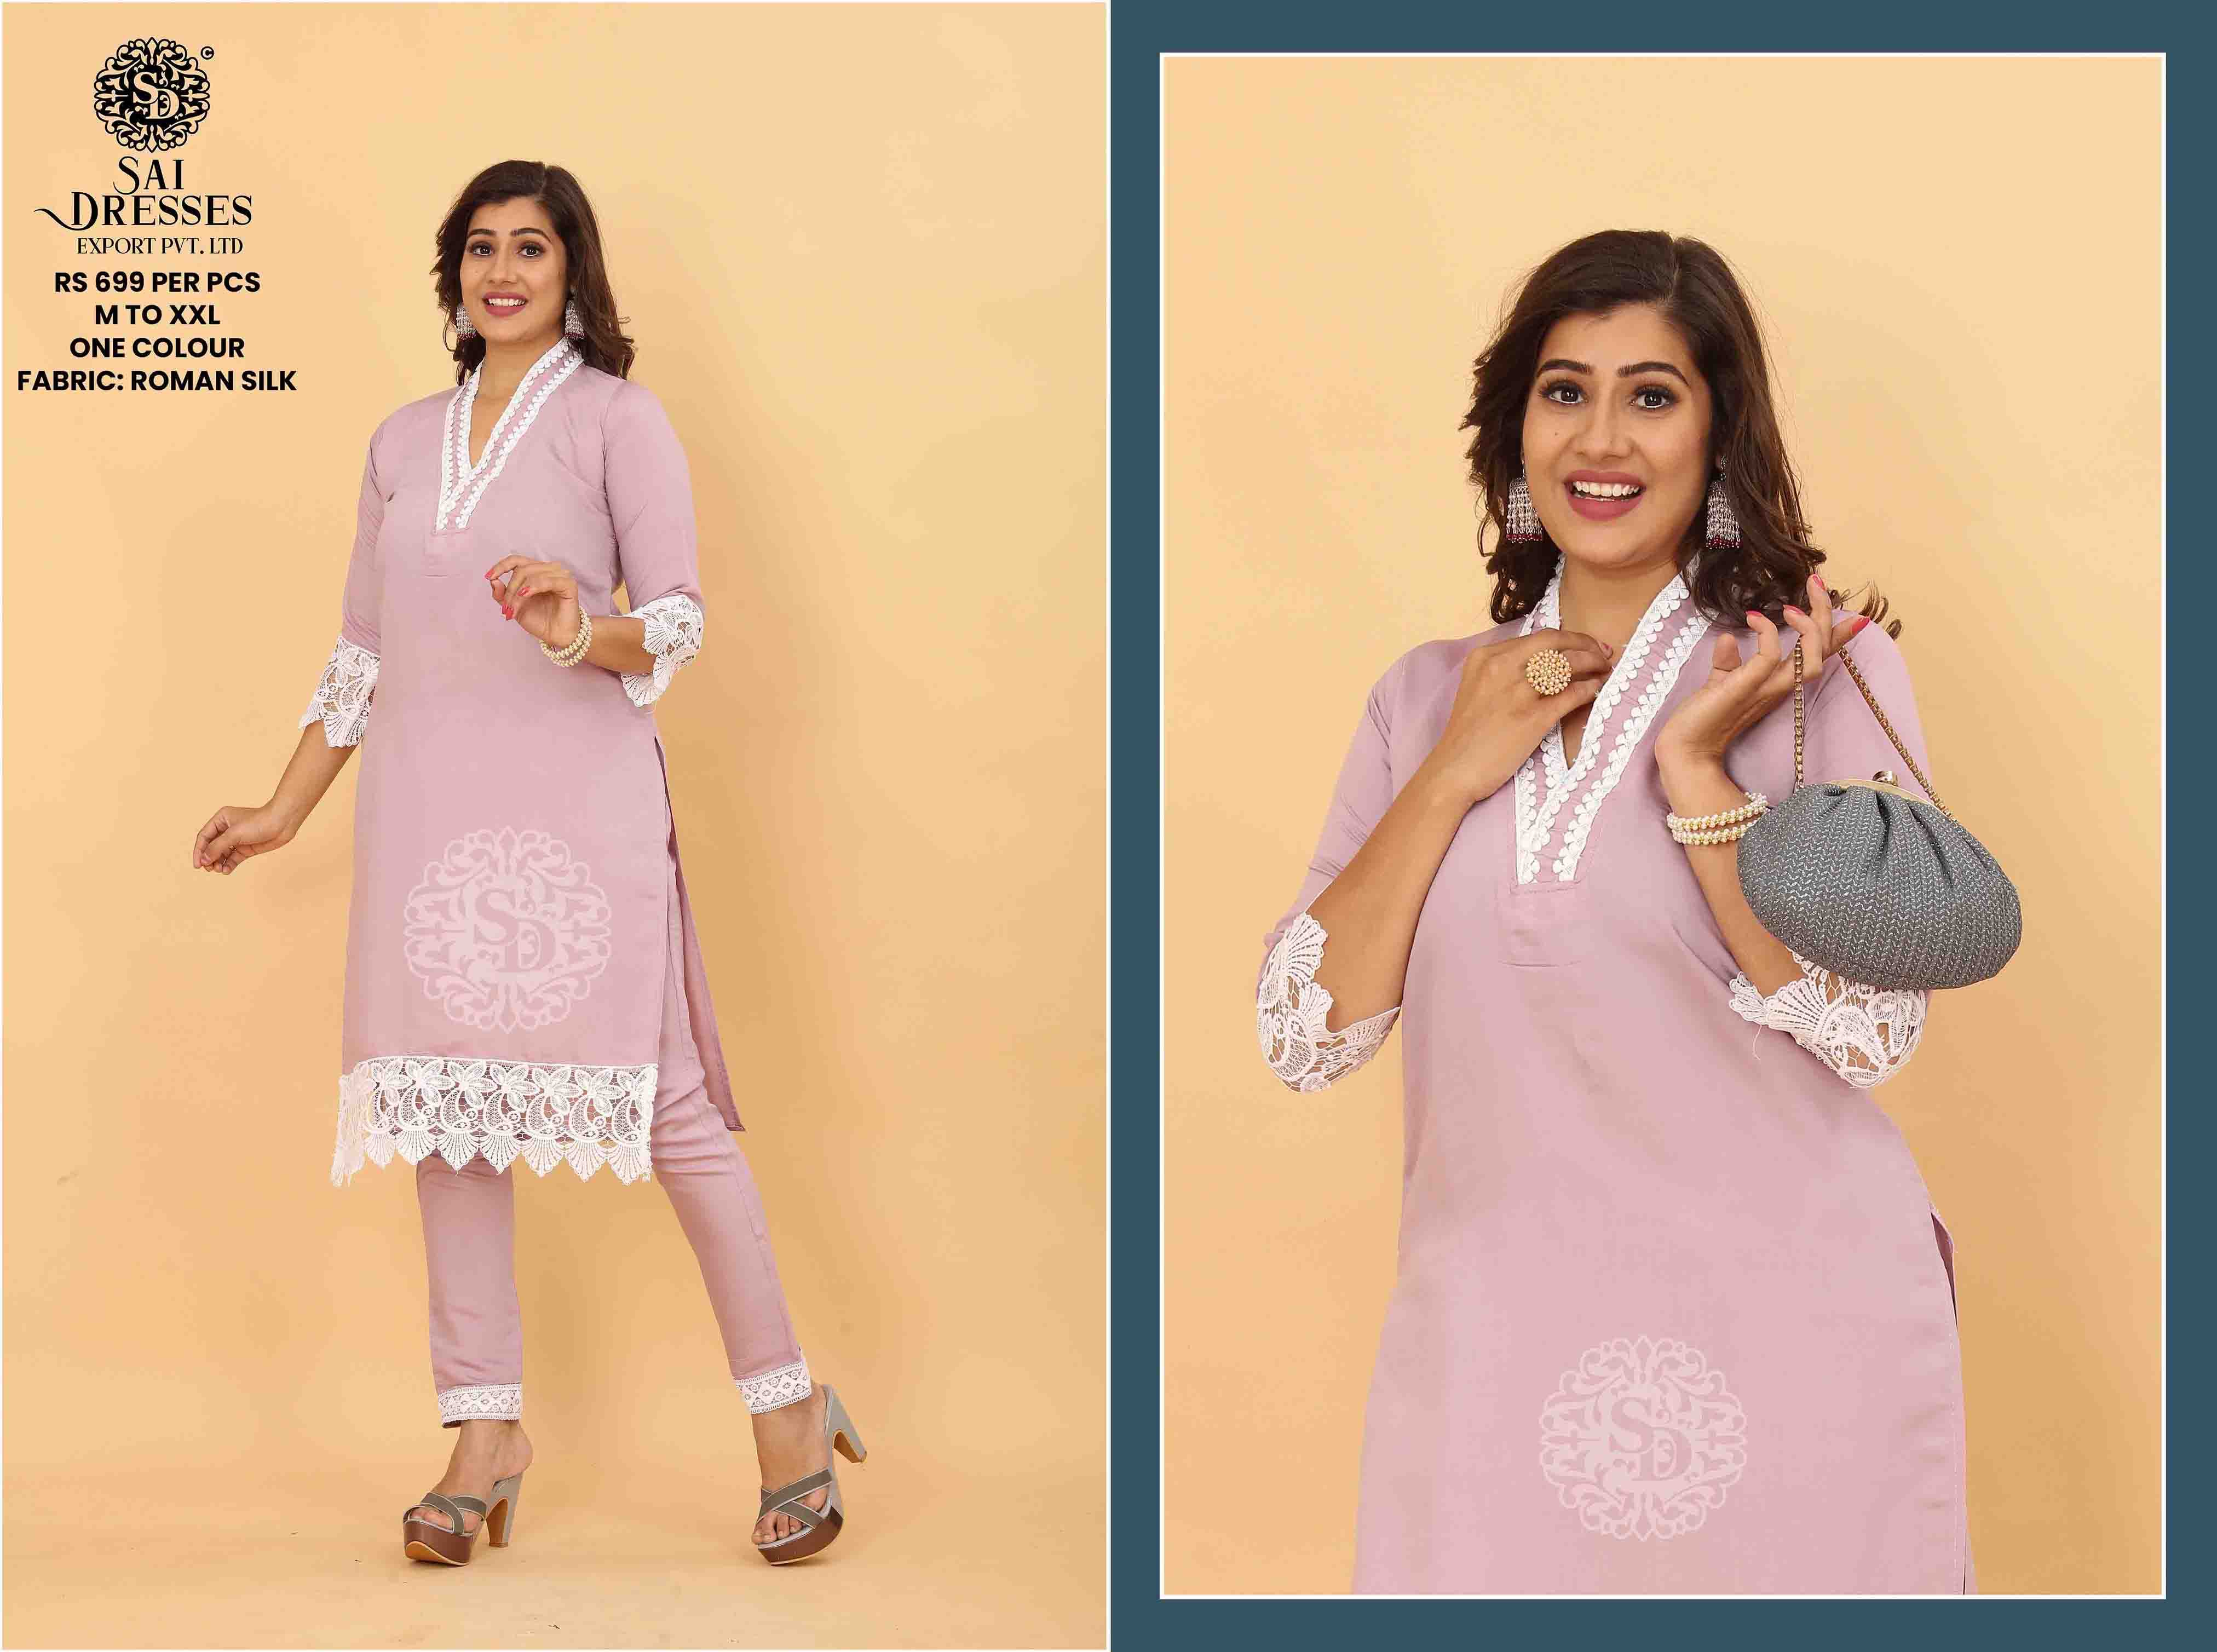 SAI DRESSES PRESENT D.NO SD 5006 READY TO TRENDY WEAR ROMAN SILK DESIGNER KURTI WITH PANT COMBO COLLECTION IN WHOLESALE RATE IN SURAT